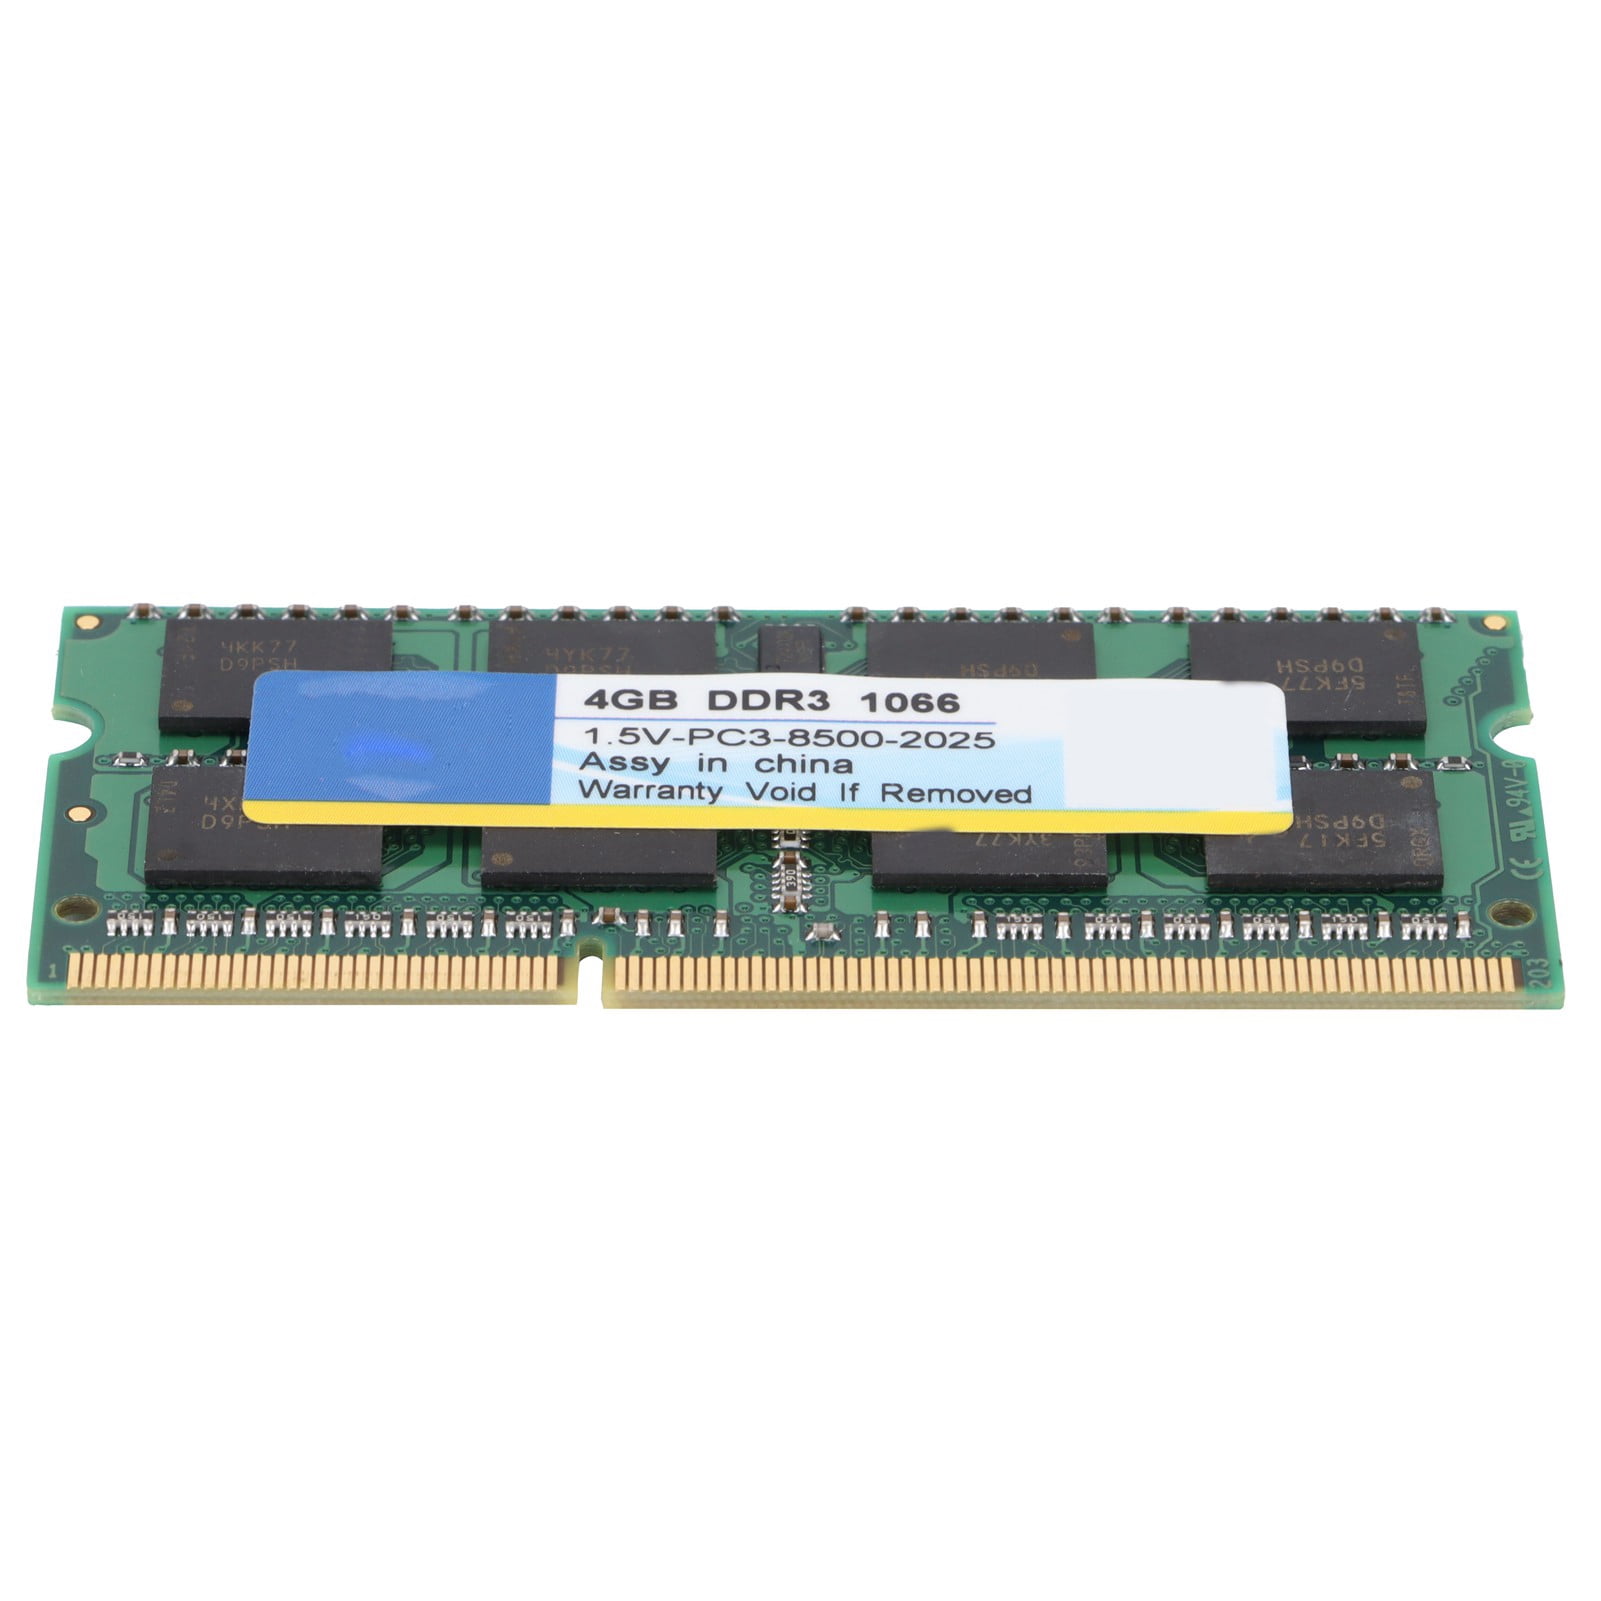 RAM, DDR3 1066Mhz For Gamer Notebook Computer For Laptop -